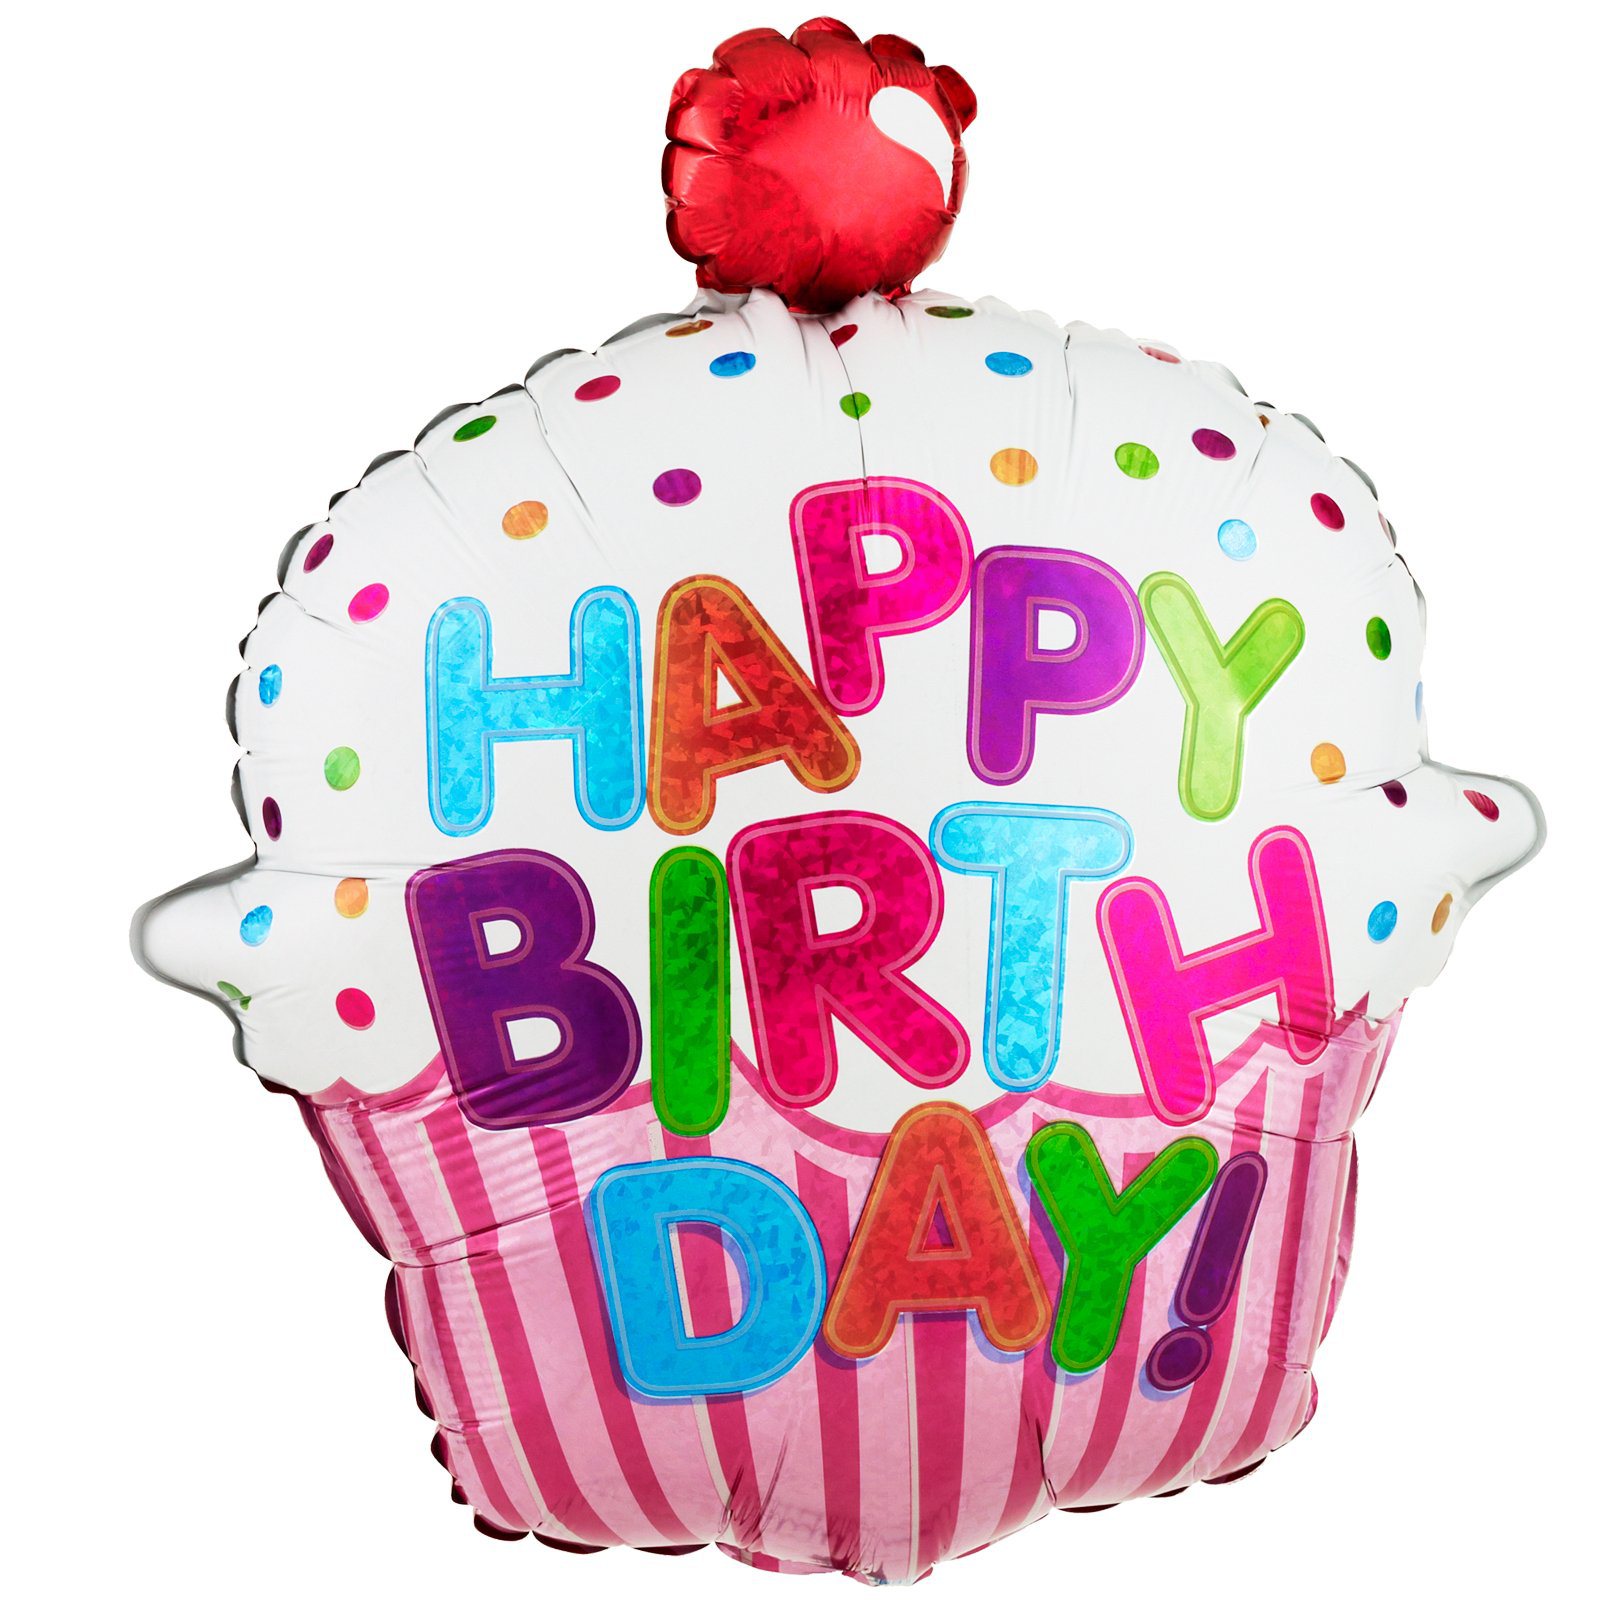 Happy Birthday Picture Messages October 2014 Ideas